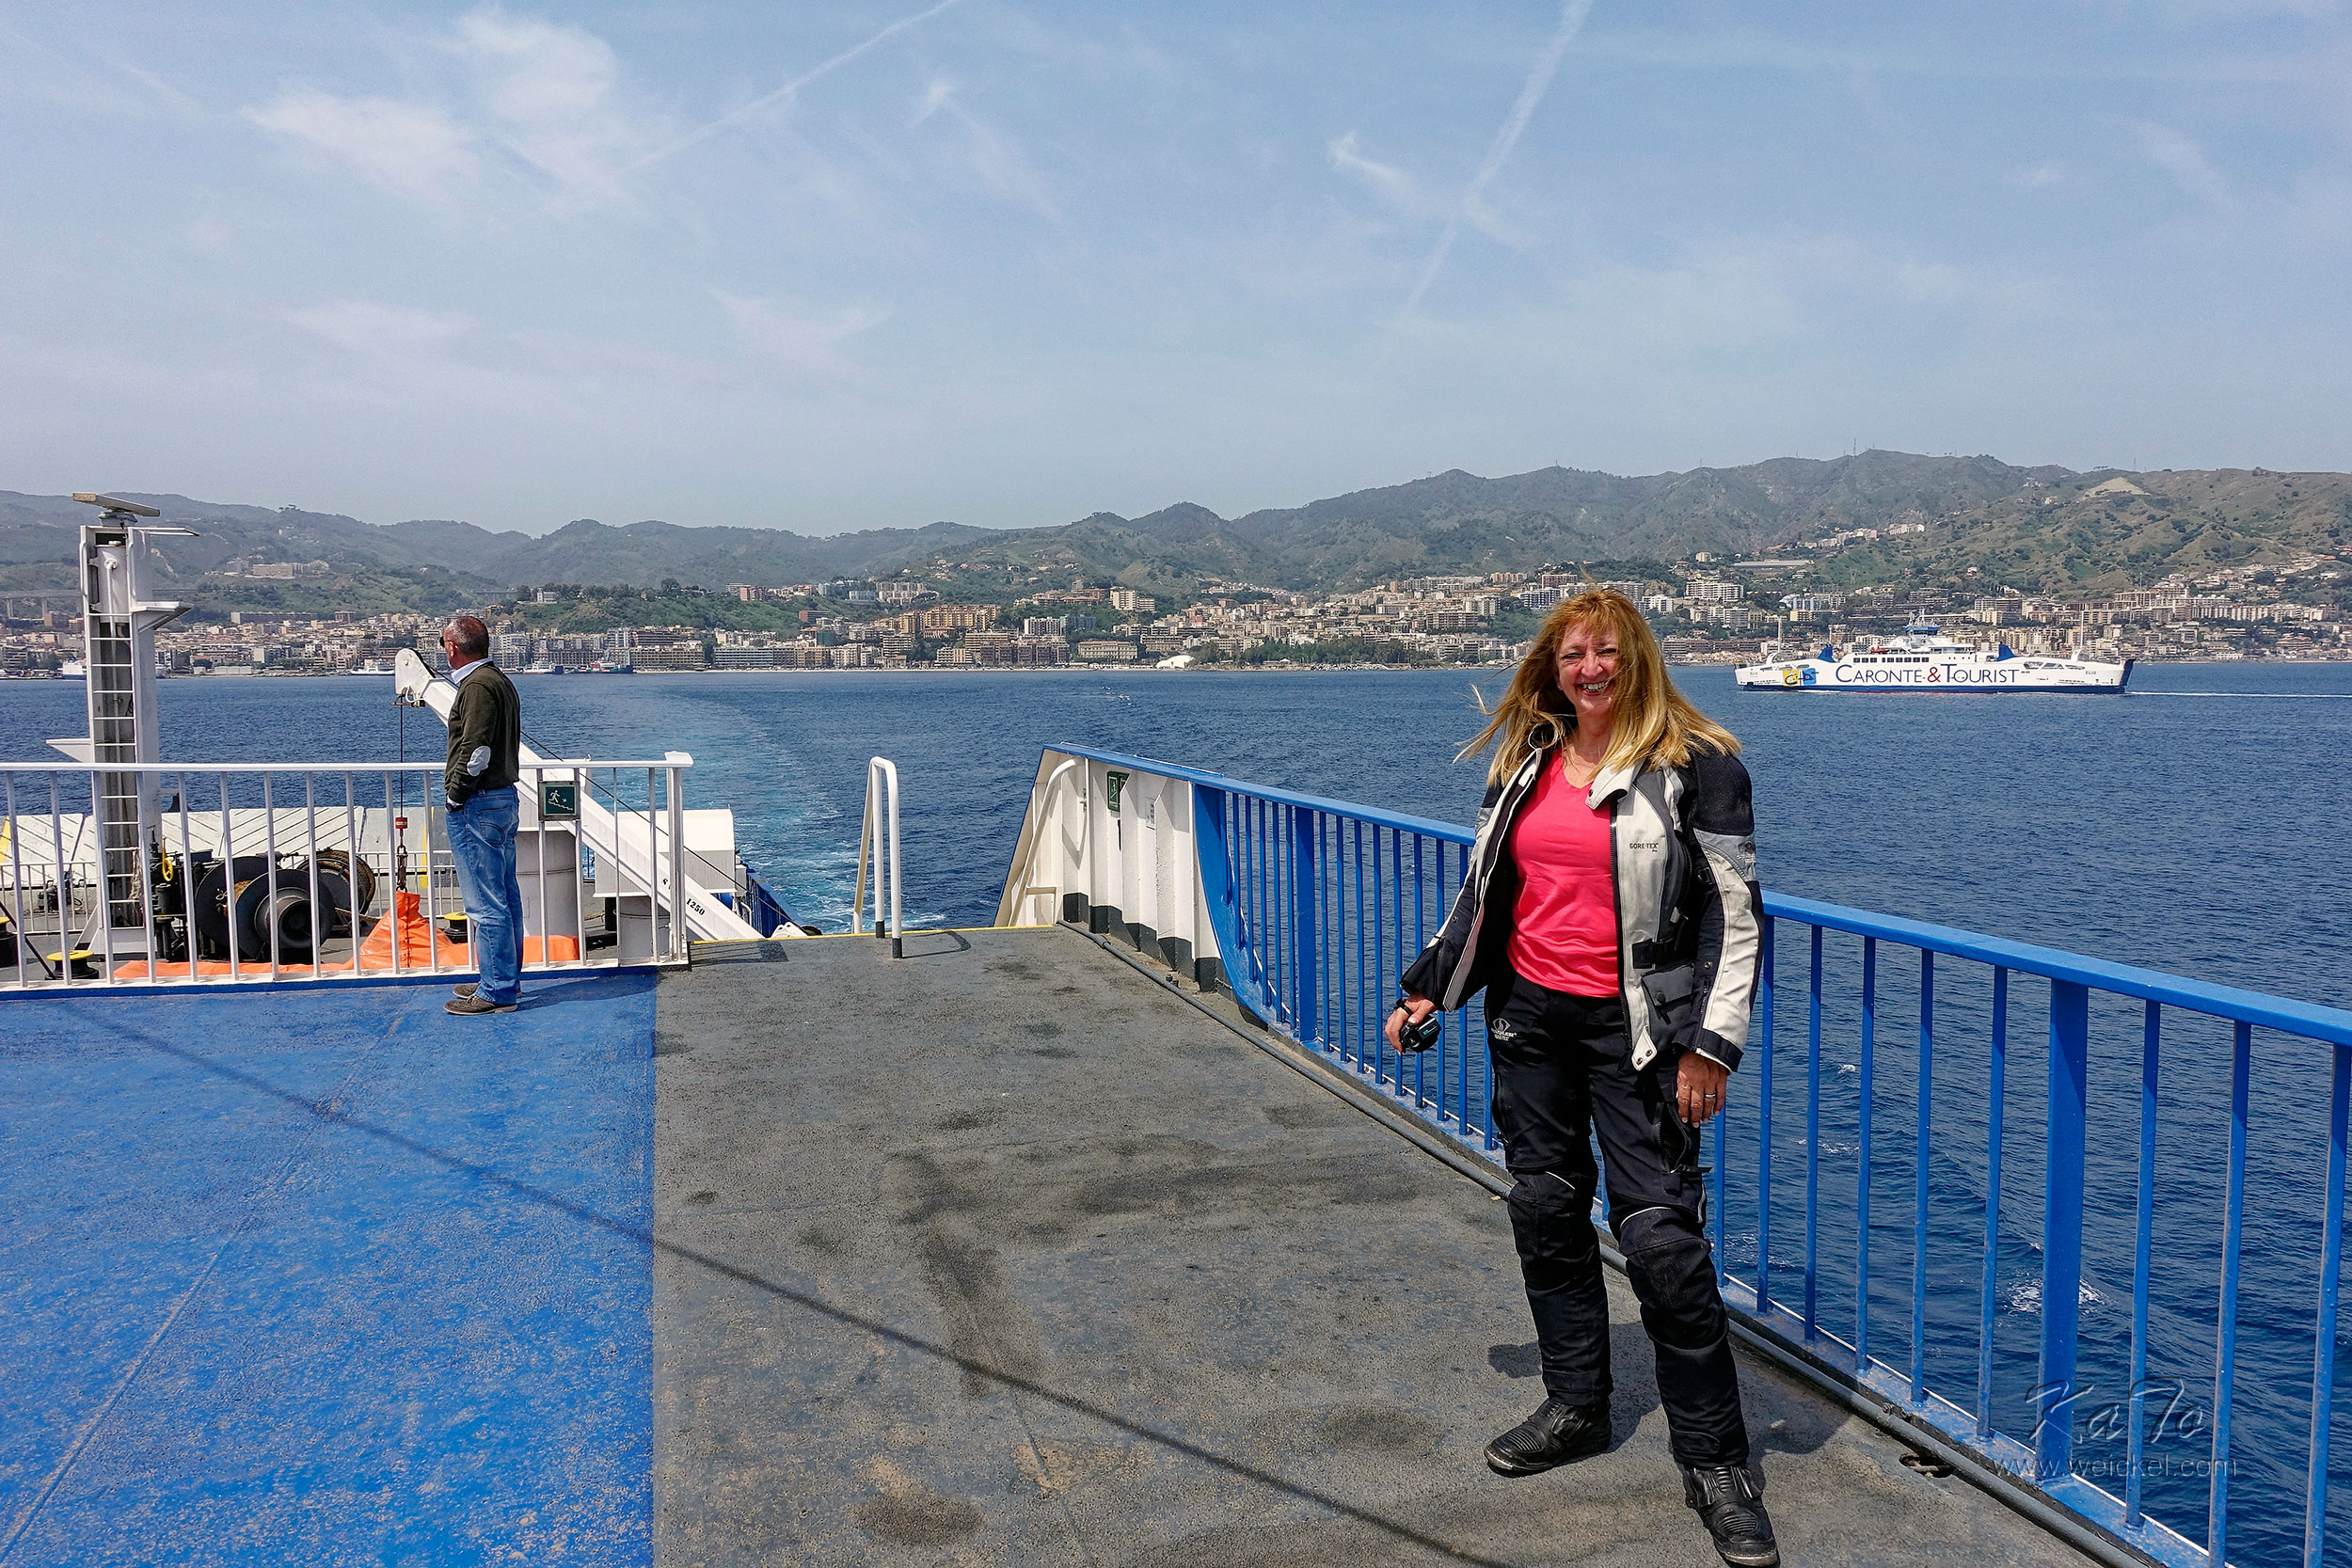 On the ferry from Sicily to Calabria